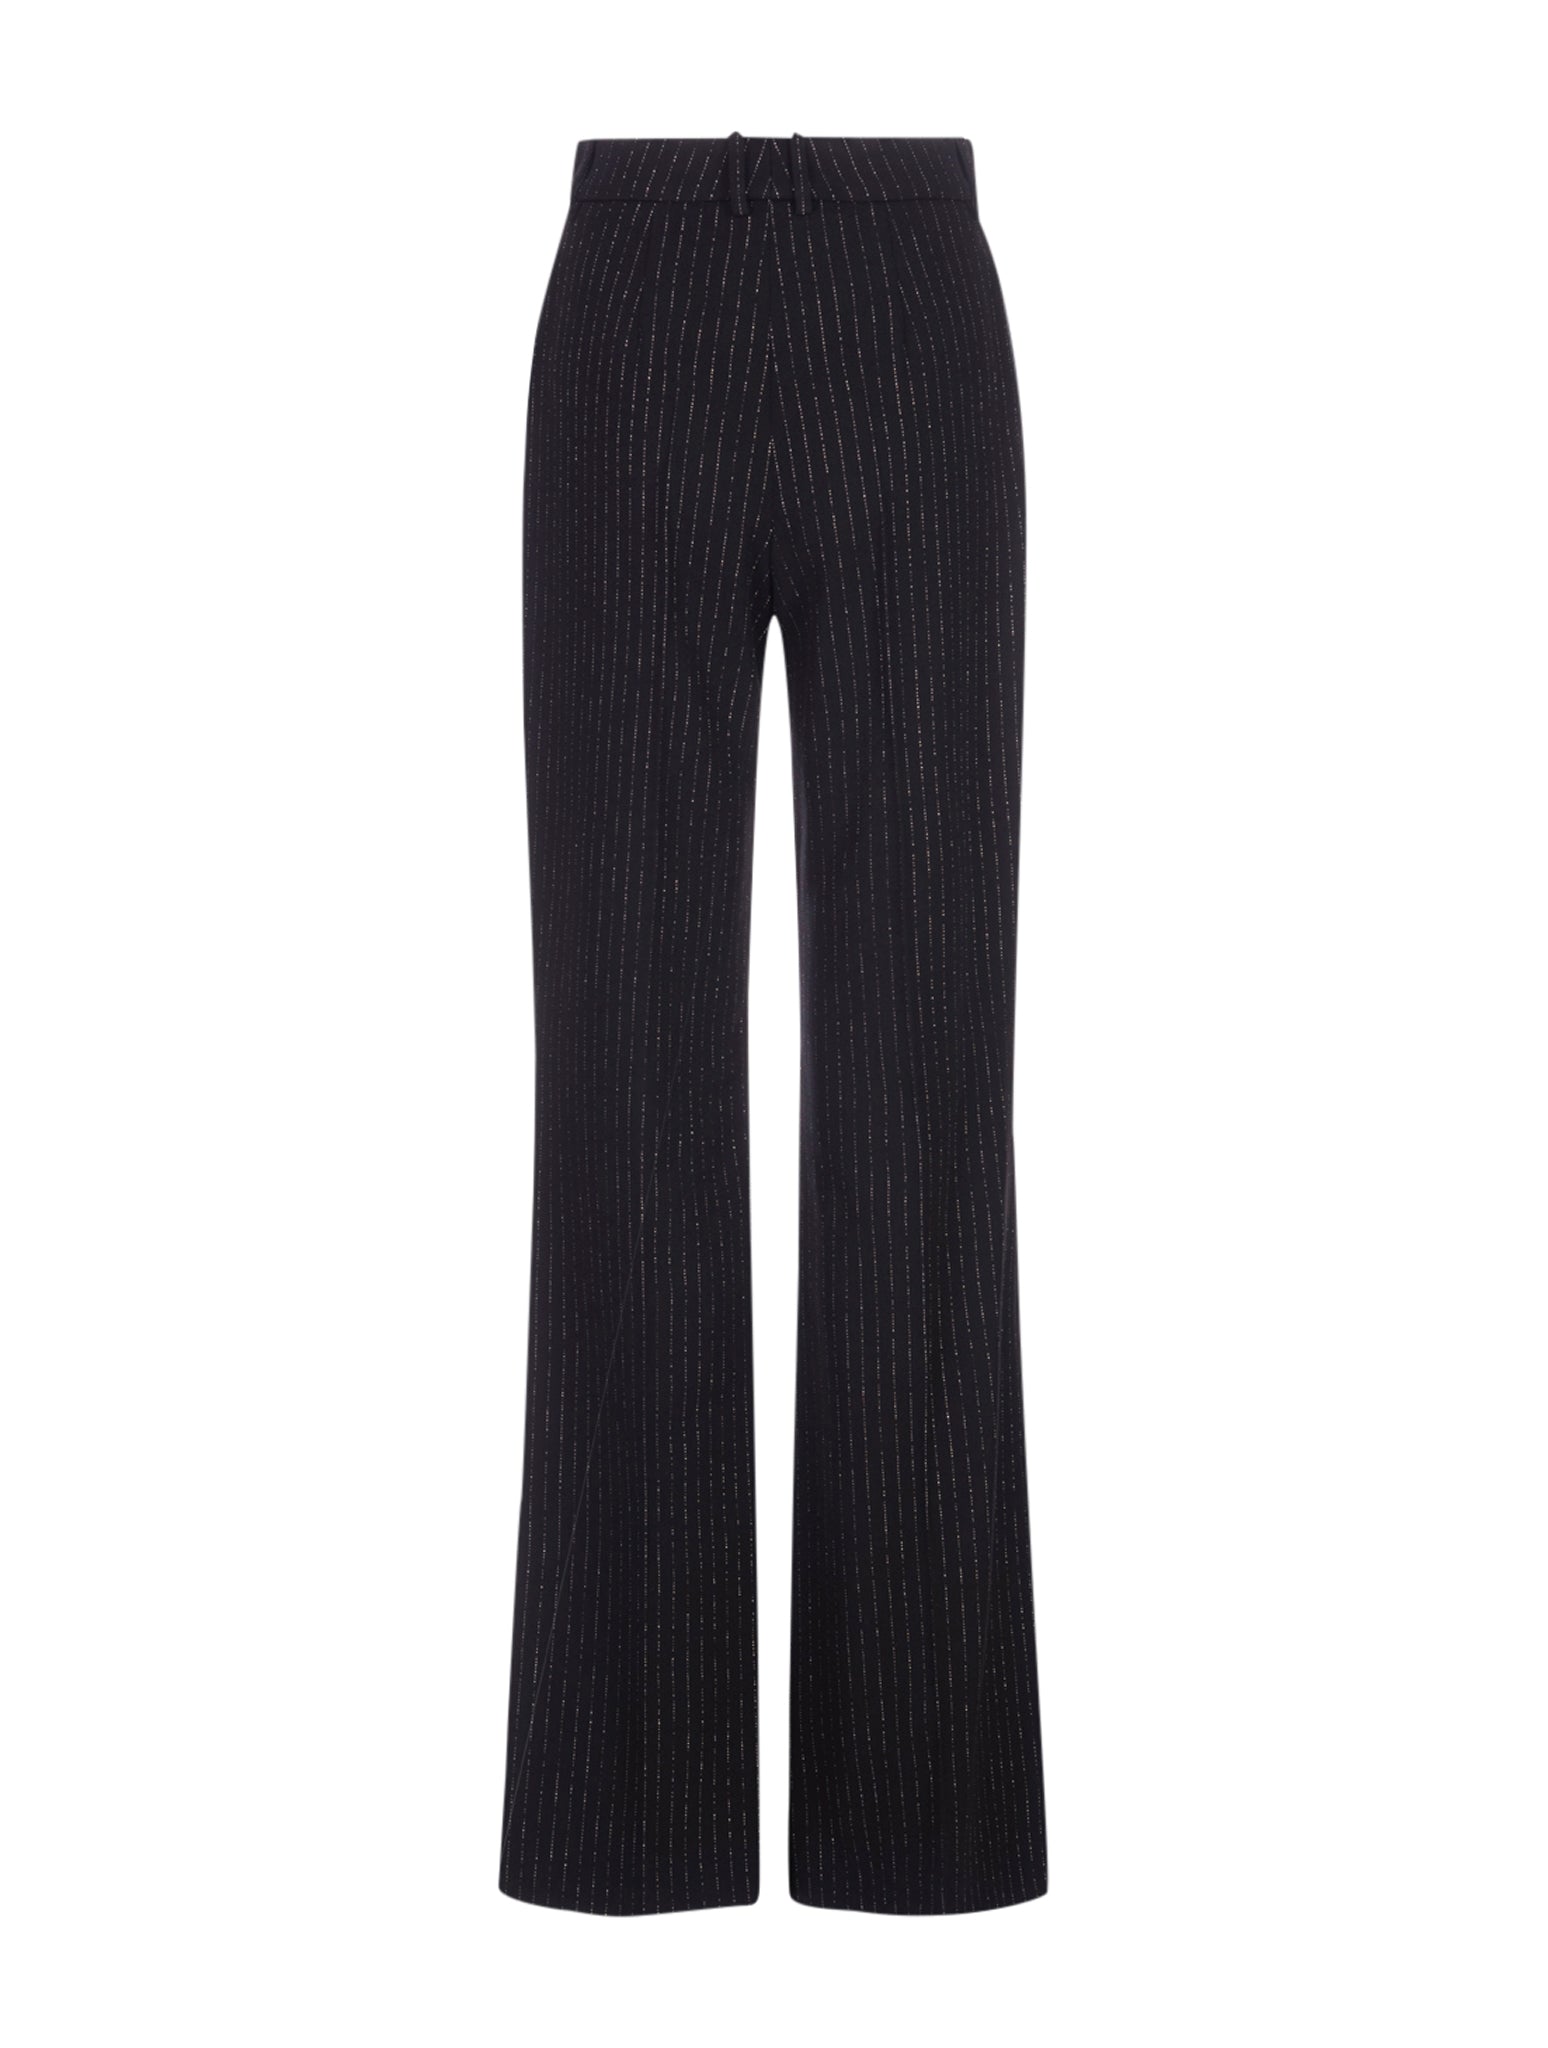 Black Flare Pants with Lurex Stripes